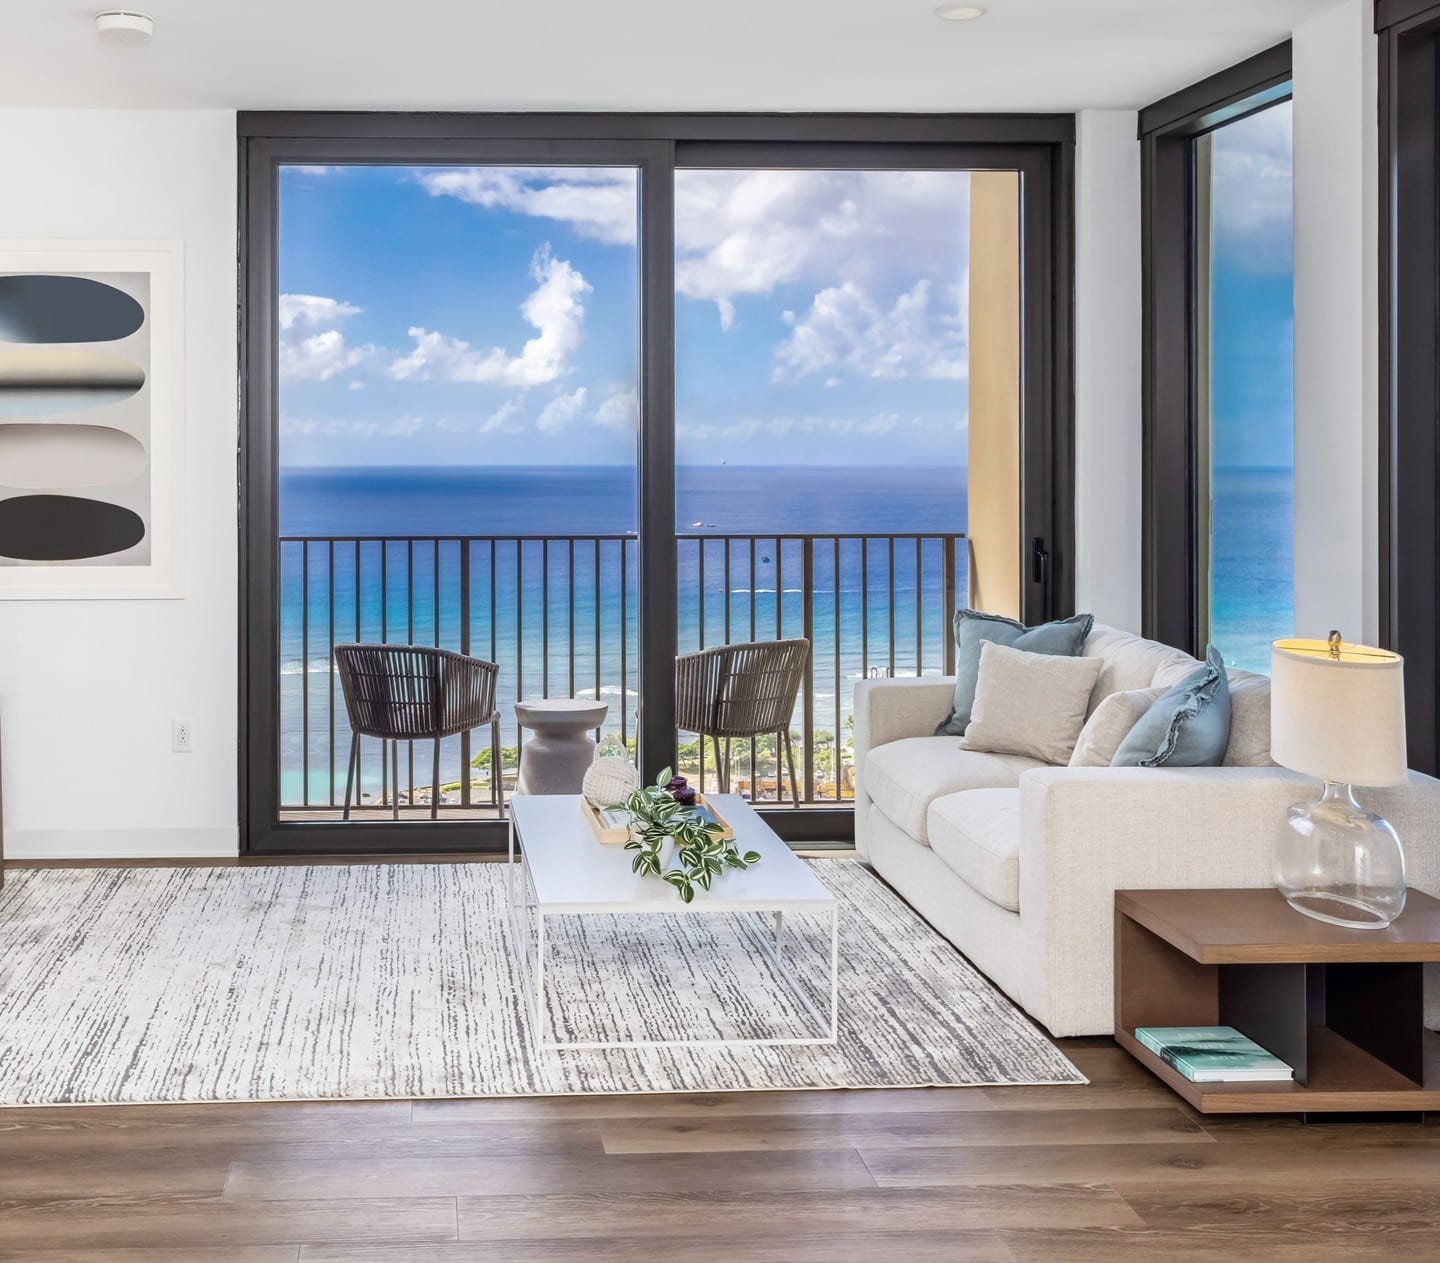 With views of the Pacific Ocean and Koʻolau mountains, the exceptional beauty of Hawai‘i can be seen and felt throughout your entire home at ‘A‘ali‘i. Discover more about these furnished move-in ready residences at www.aaliiwardvillage.com.